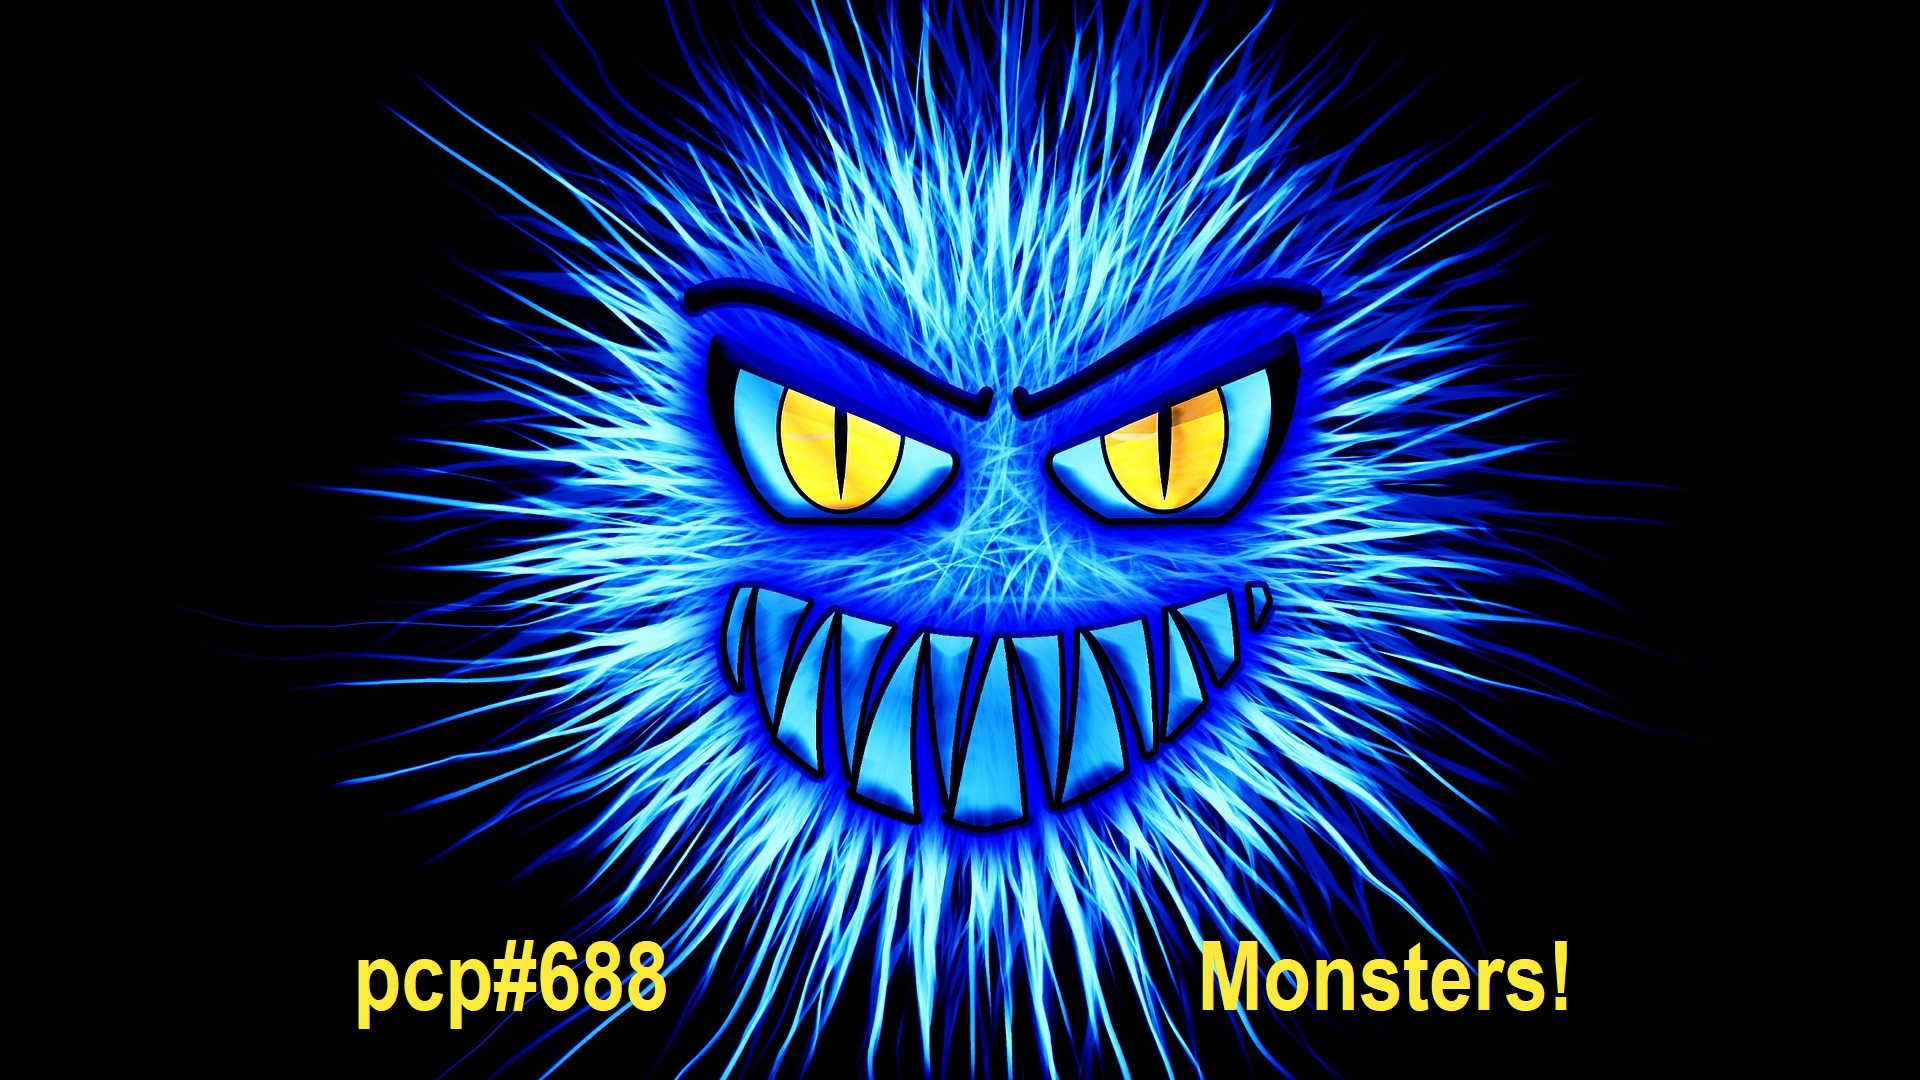 PCP#688... Monsters!